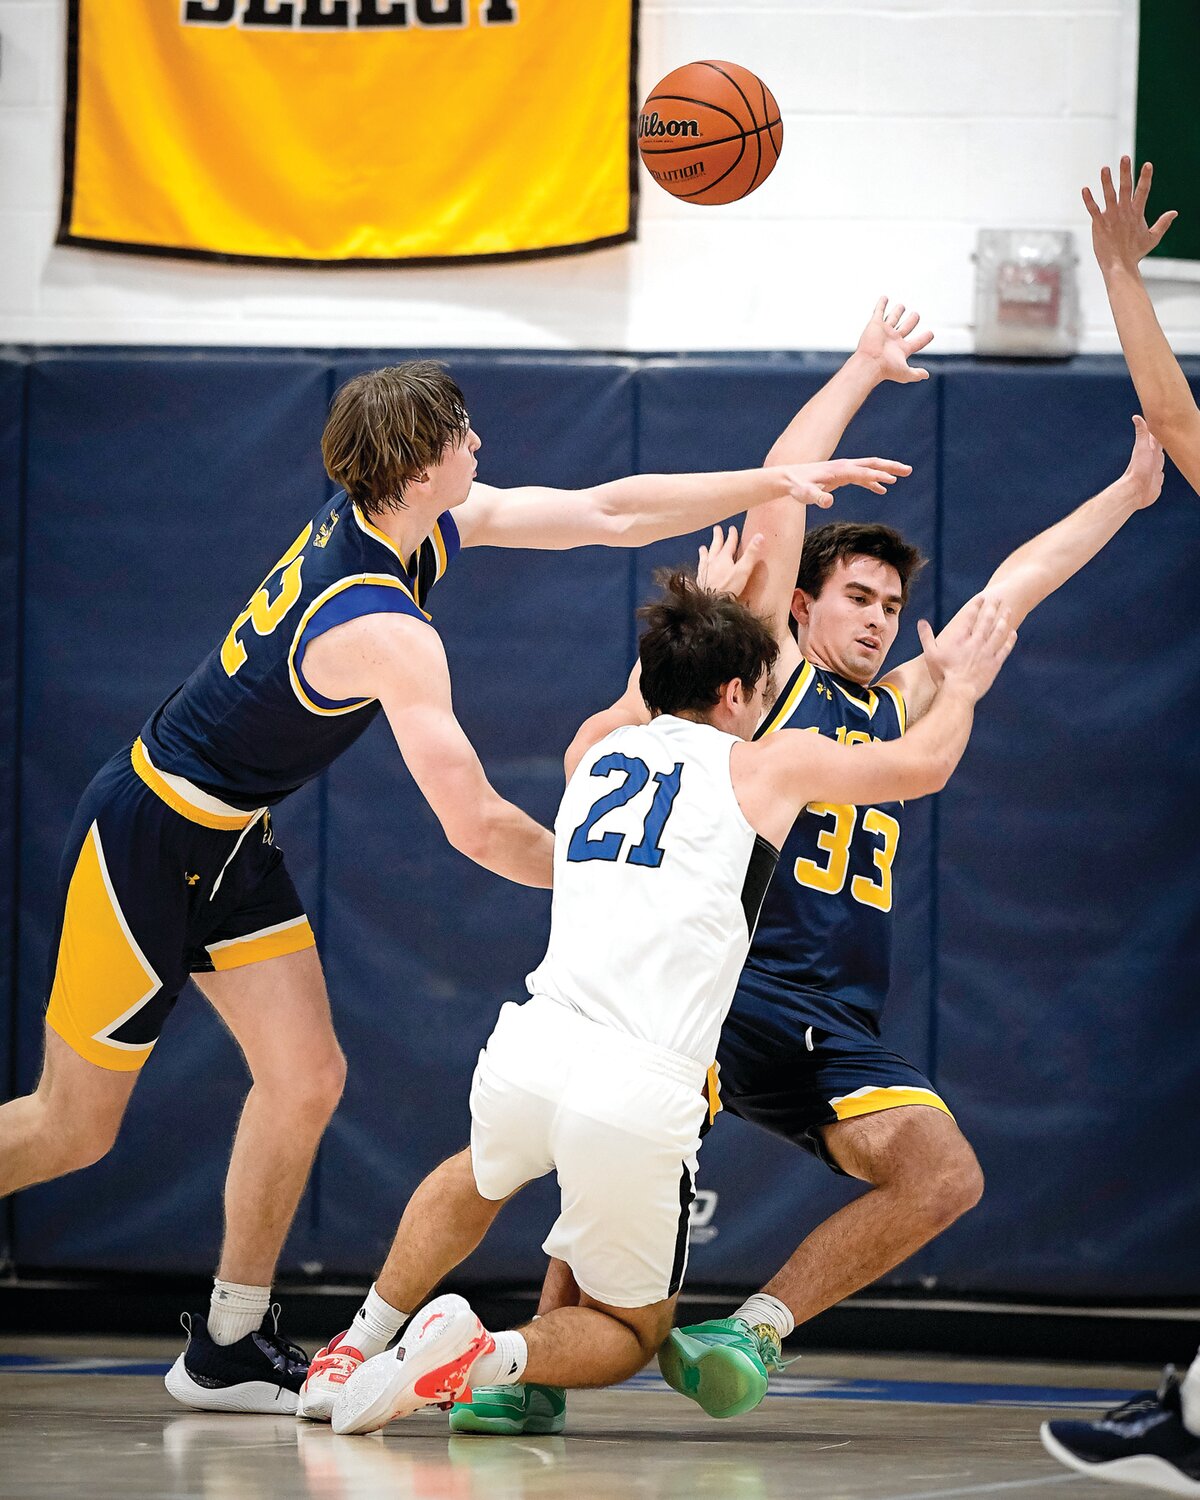 Jack M. Barrack Hebrew Academy’s Edo Aharoni gets double teamed as he crashes into a fallen New Hope-Solebury’s Dylan Fitzgerald.